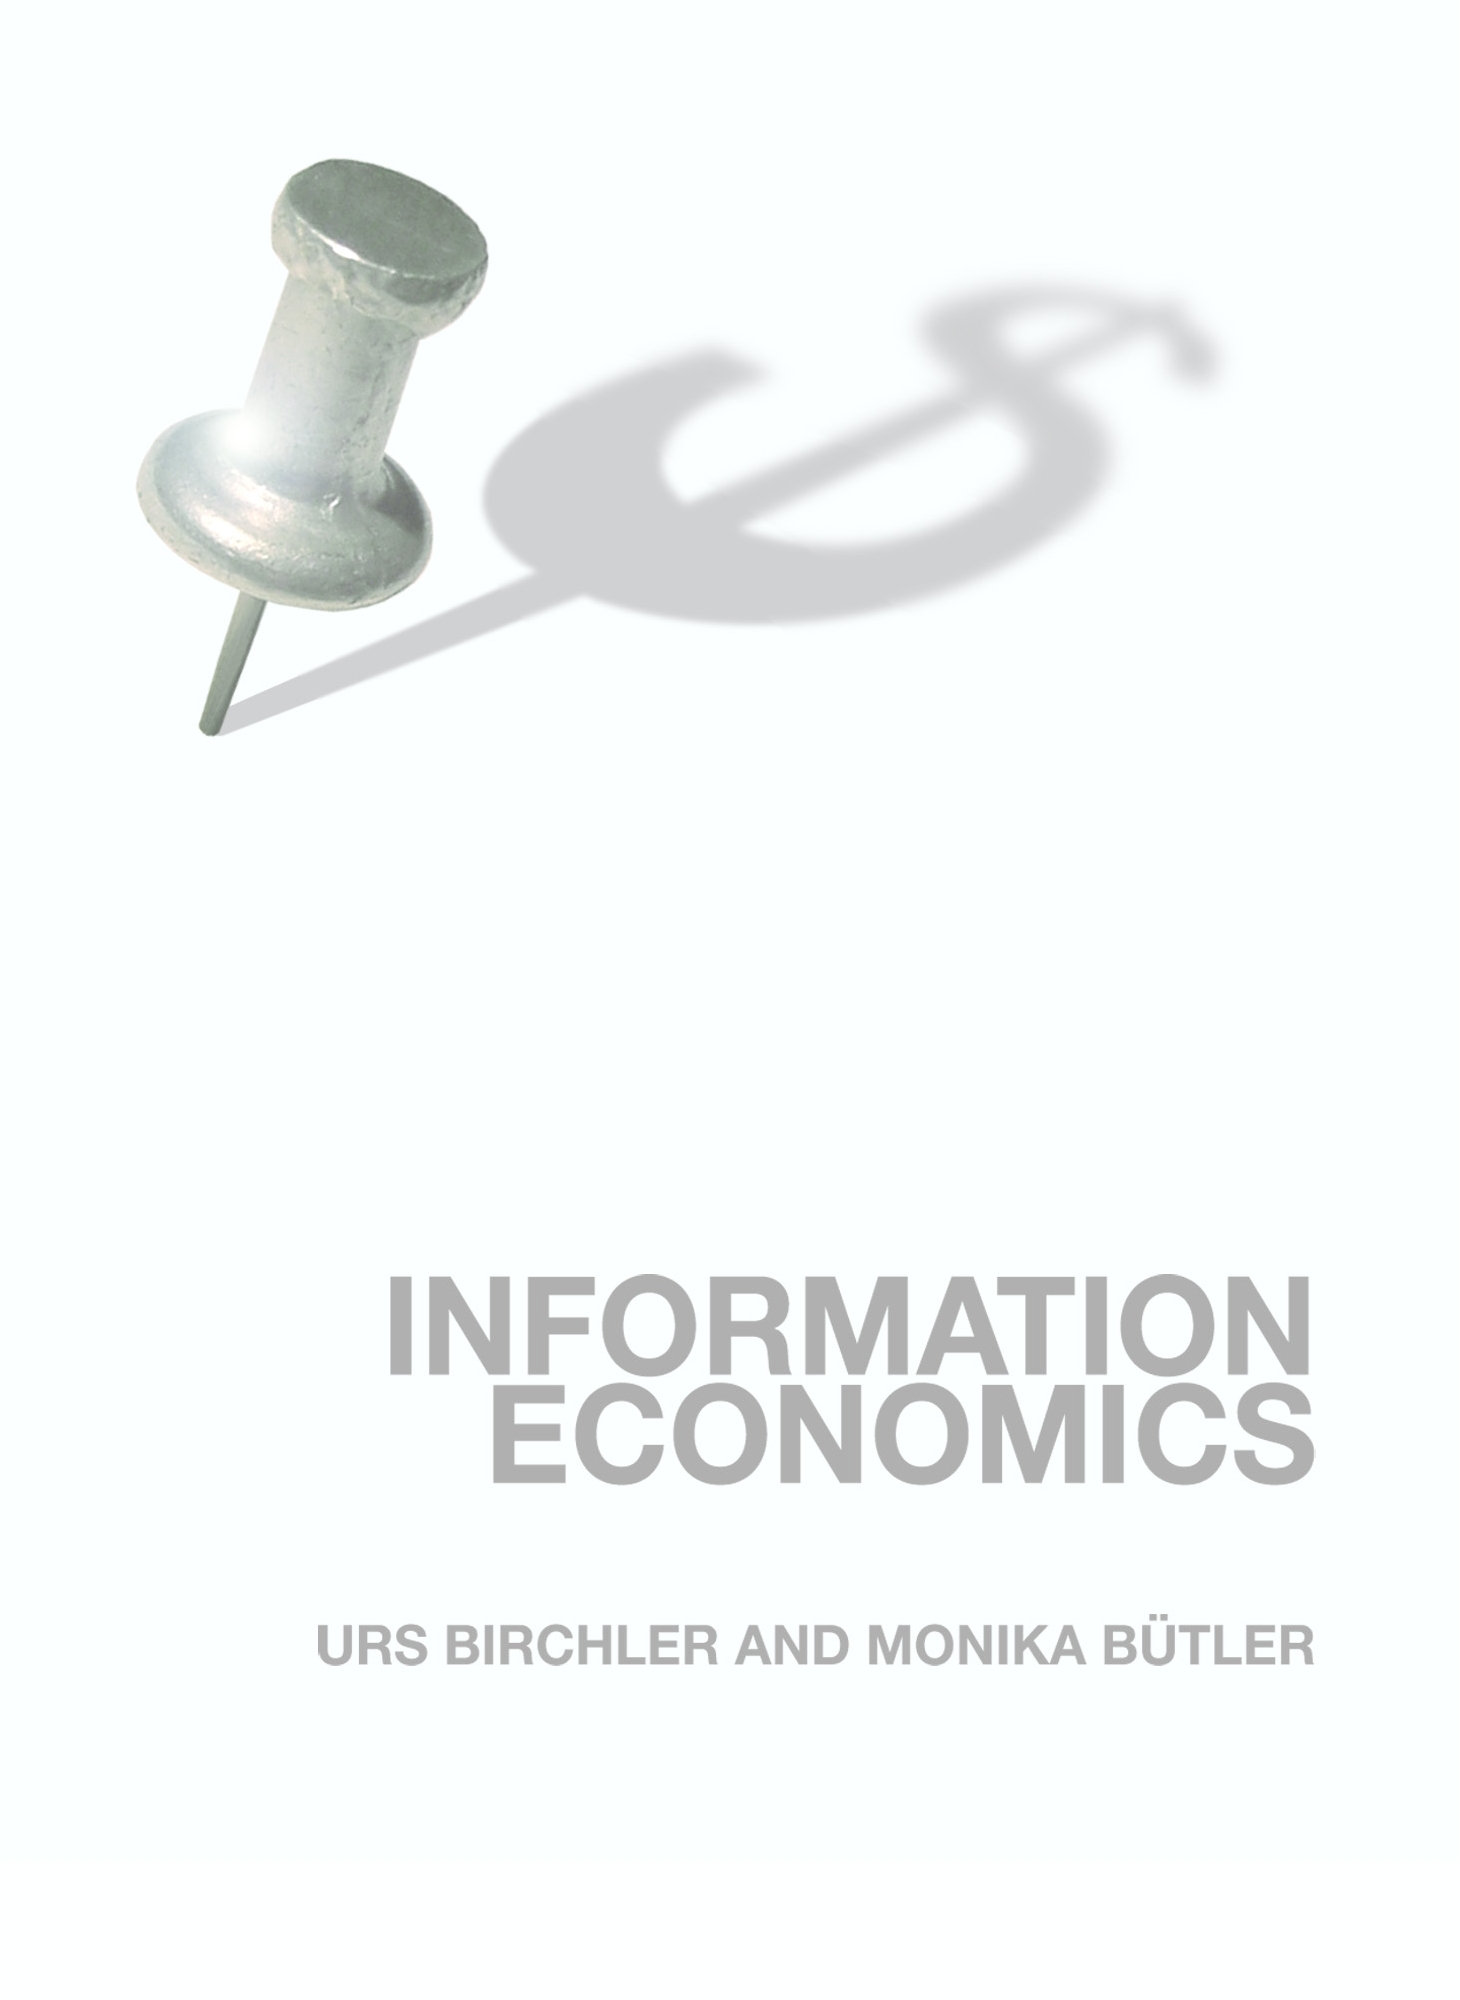 Welcome to: Information Economics -- a book by Urs Birchler and Monika Bütler.